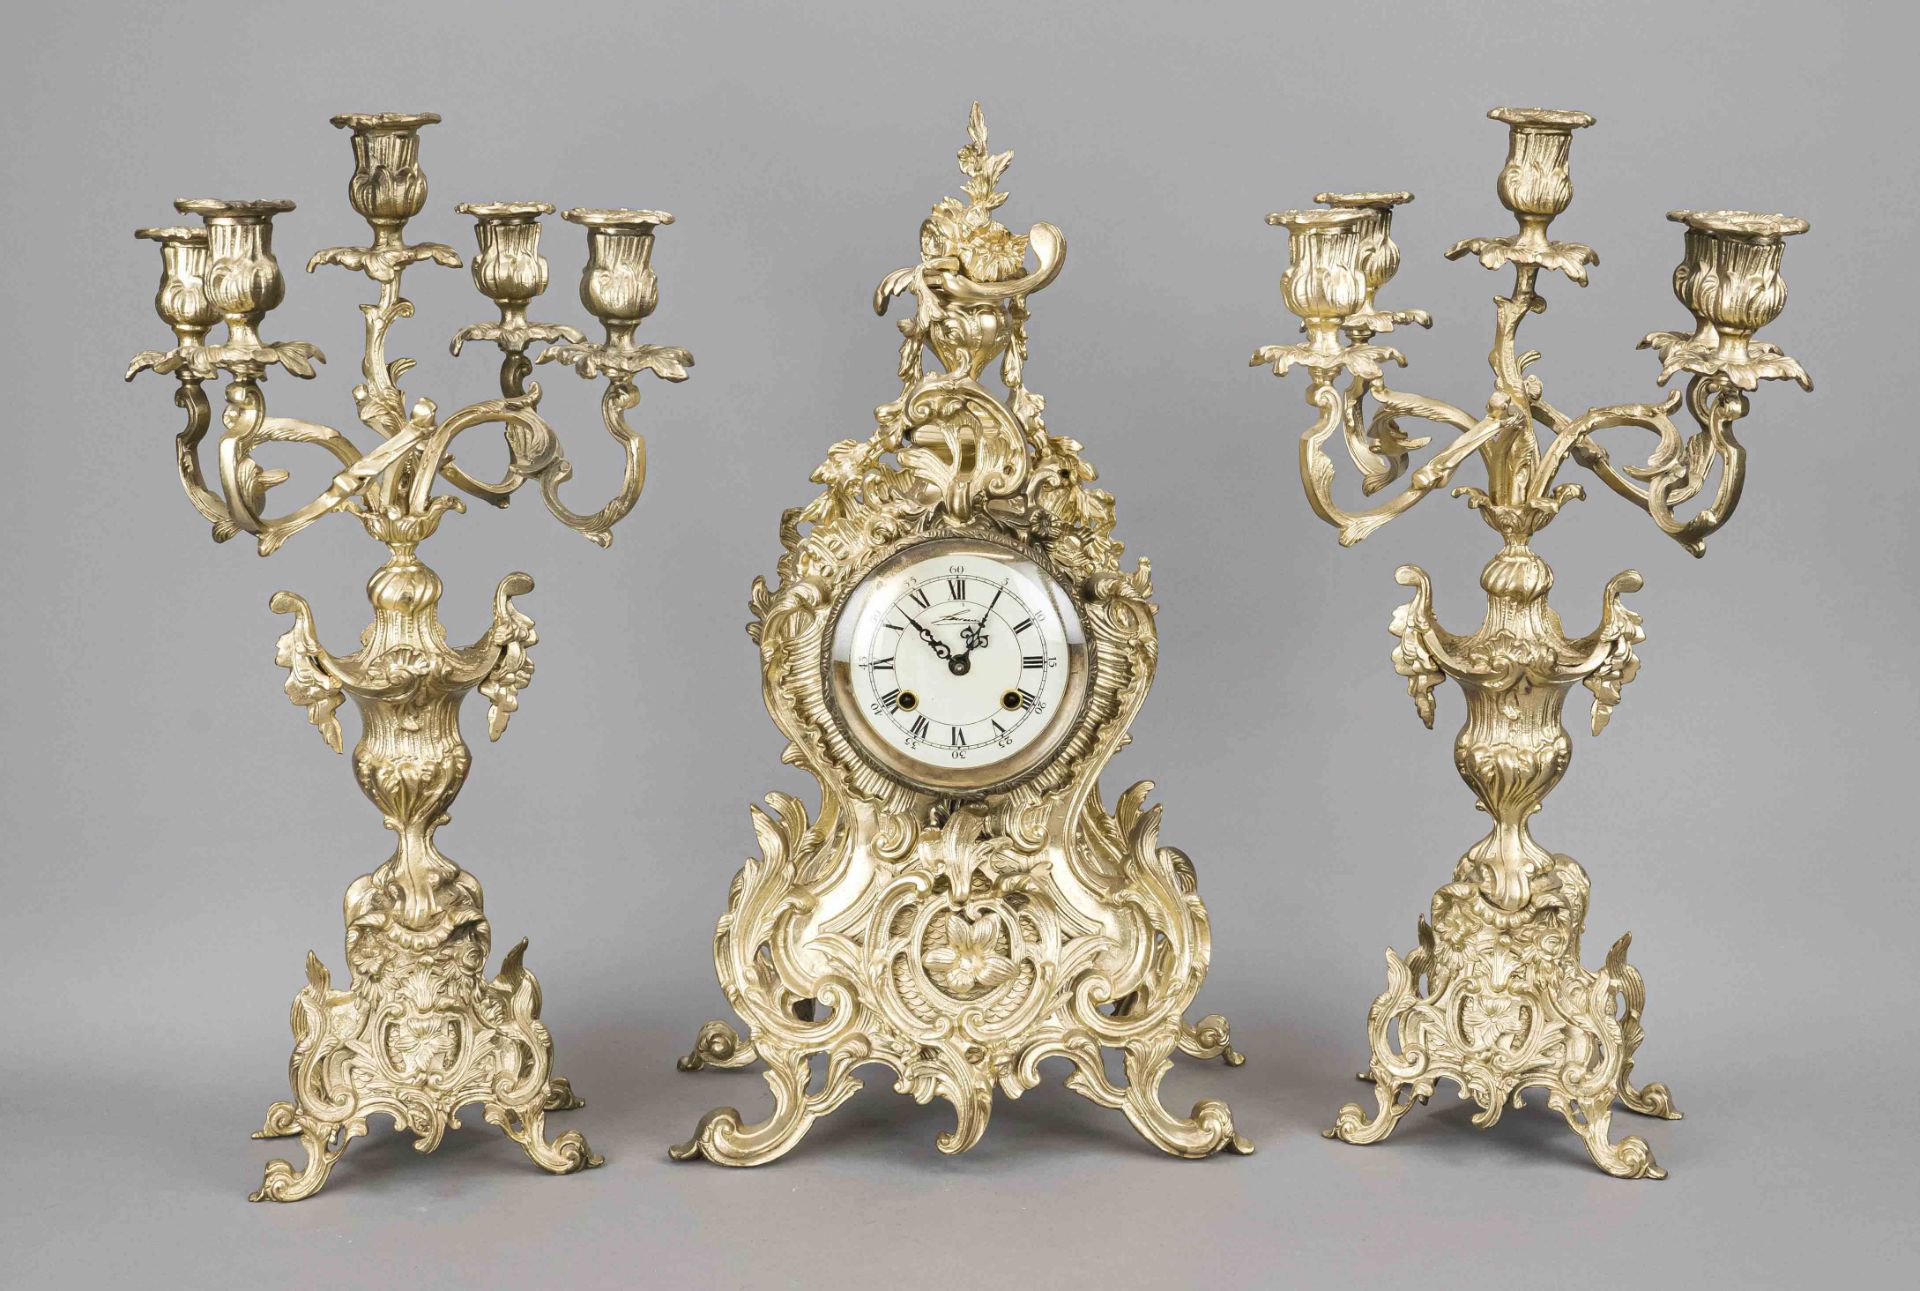 Pendulum with 2 candlesticks, 2nd half 20th century, color gilded, richly decorated with rocailles